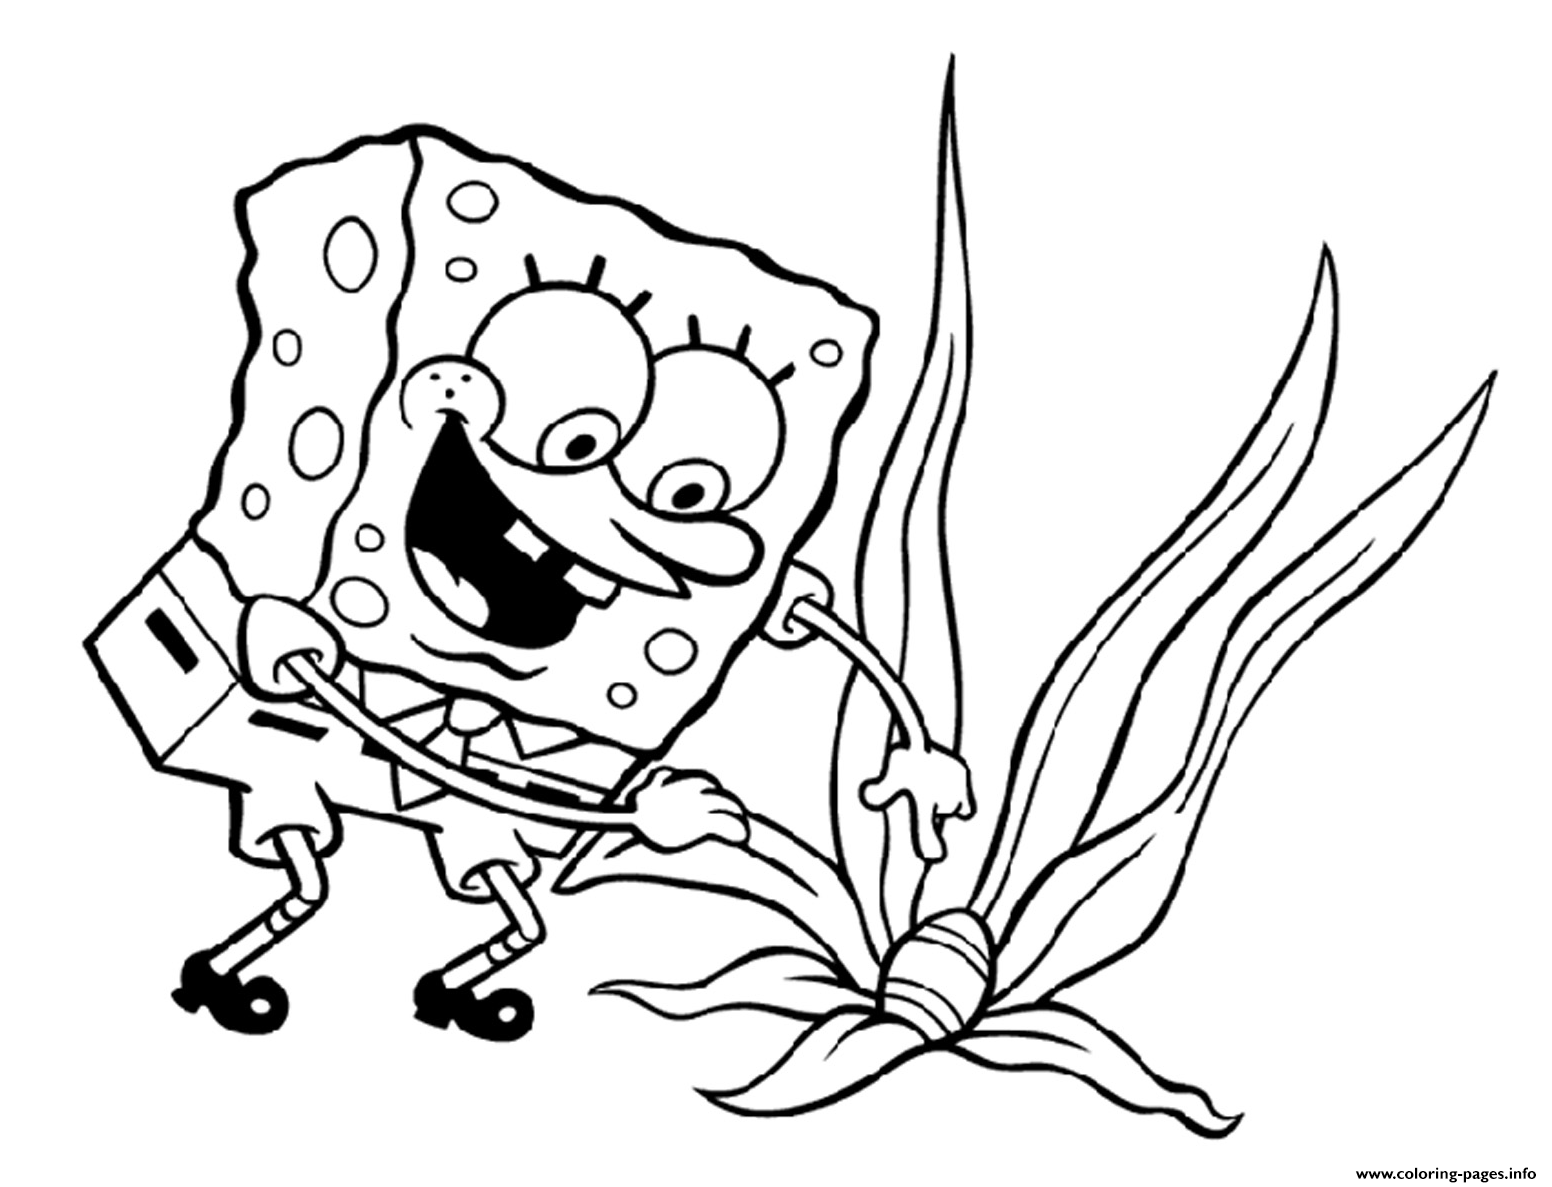 Coloring Pages For Kids Spongebob Hunting Eggs Easter7c15 coloring